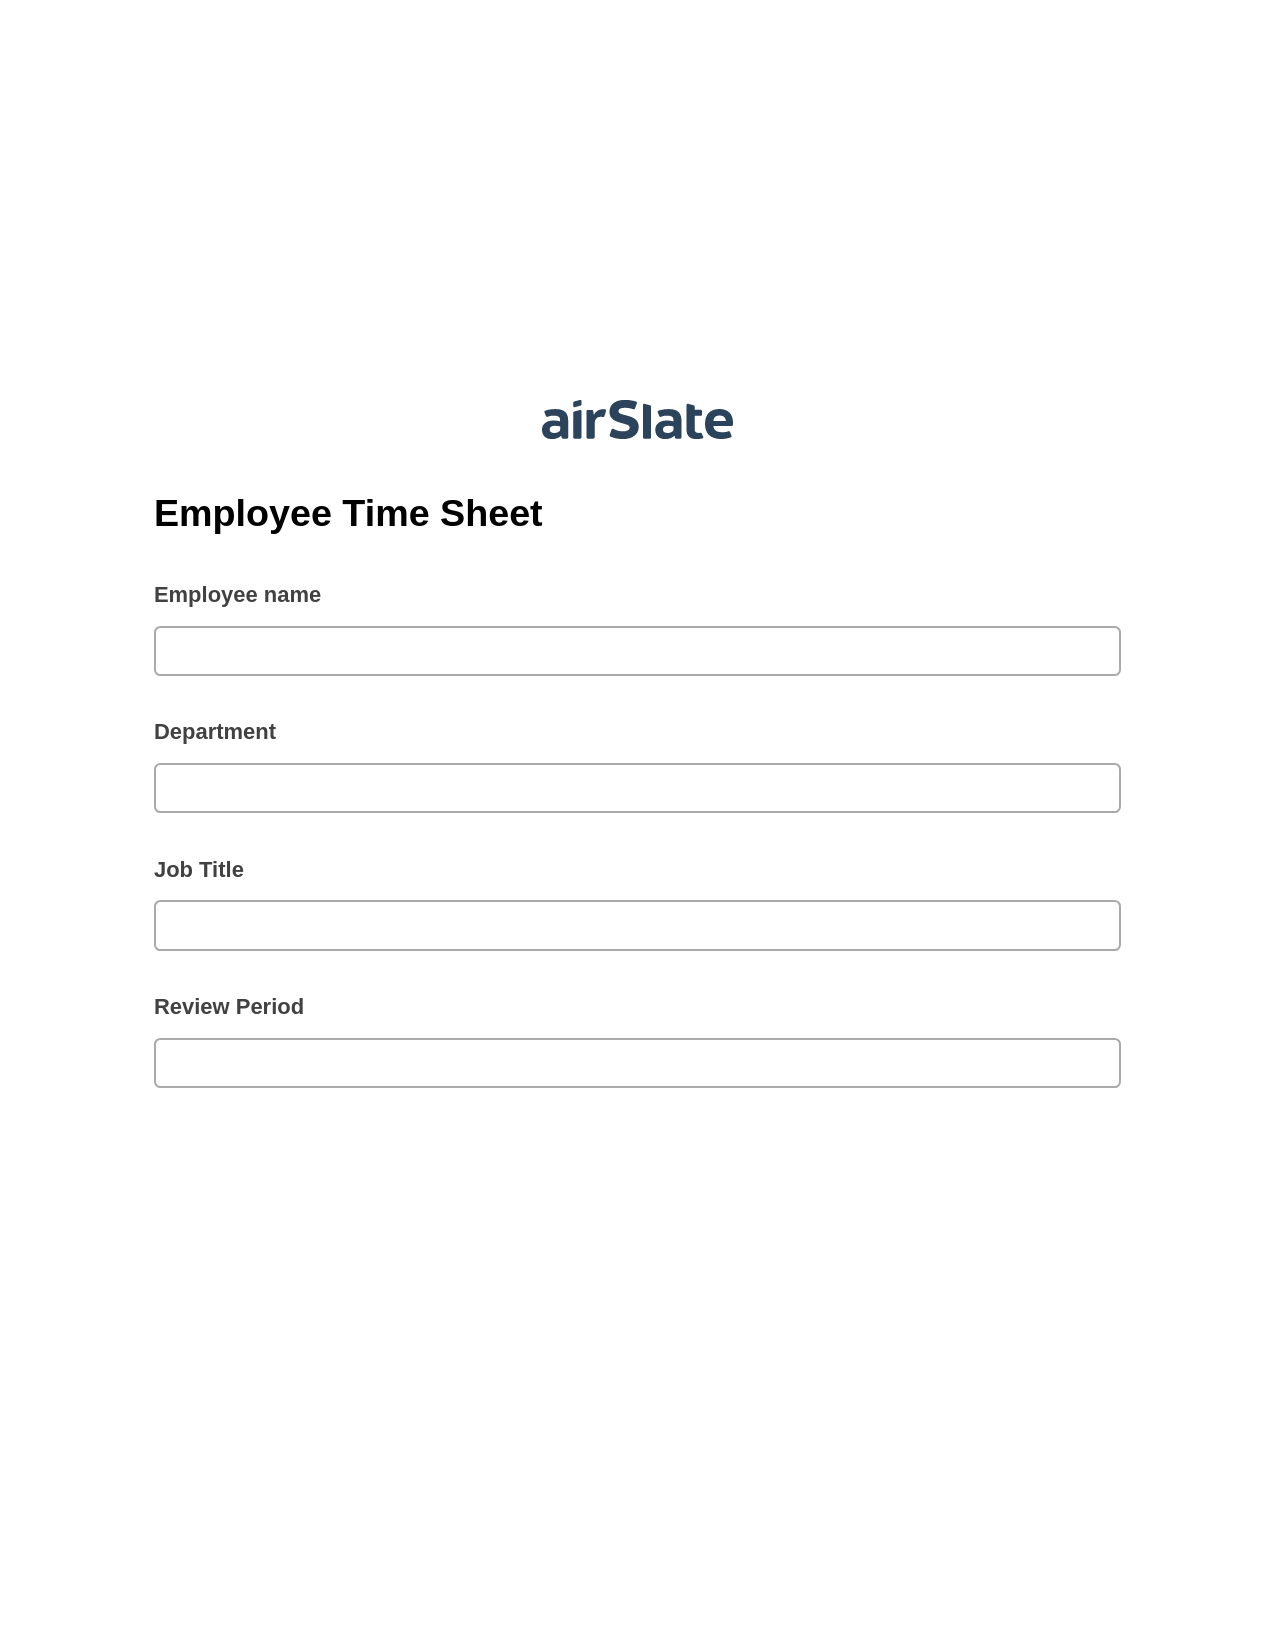 Employee Time Sheet Pre-fill from another Slate Bot, Create Salesforce Records Bot, Archive to Box Bot